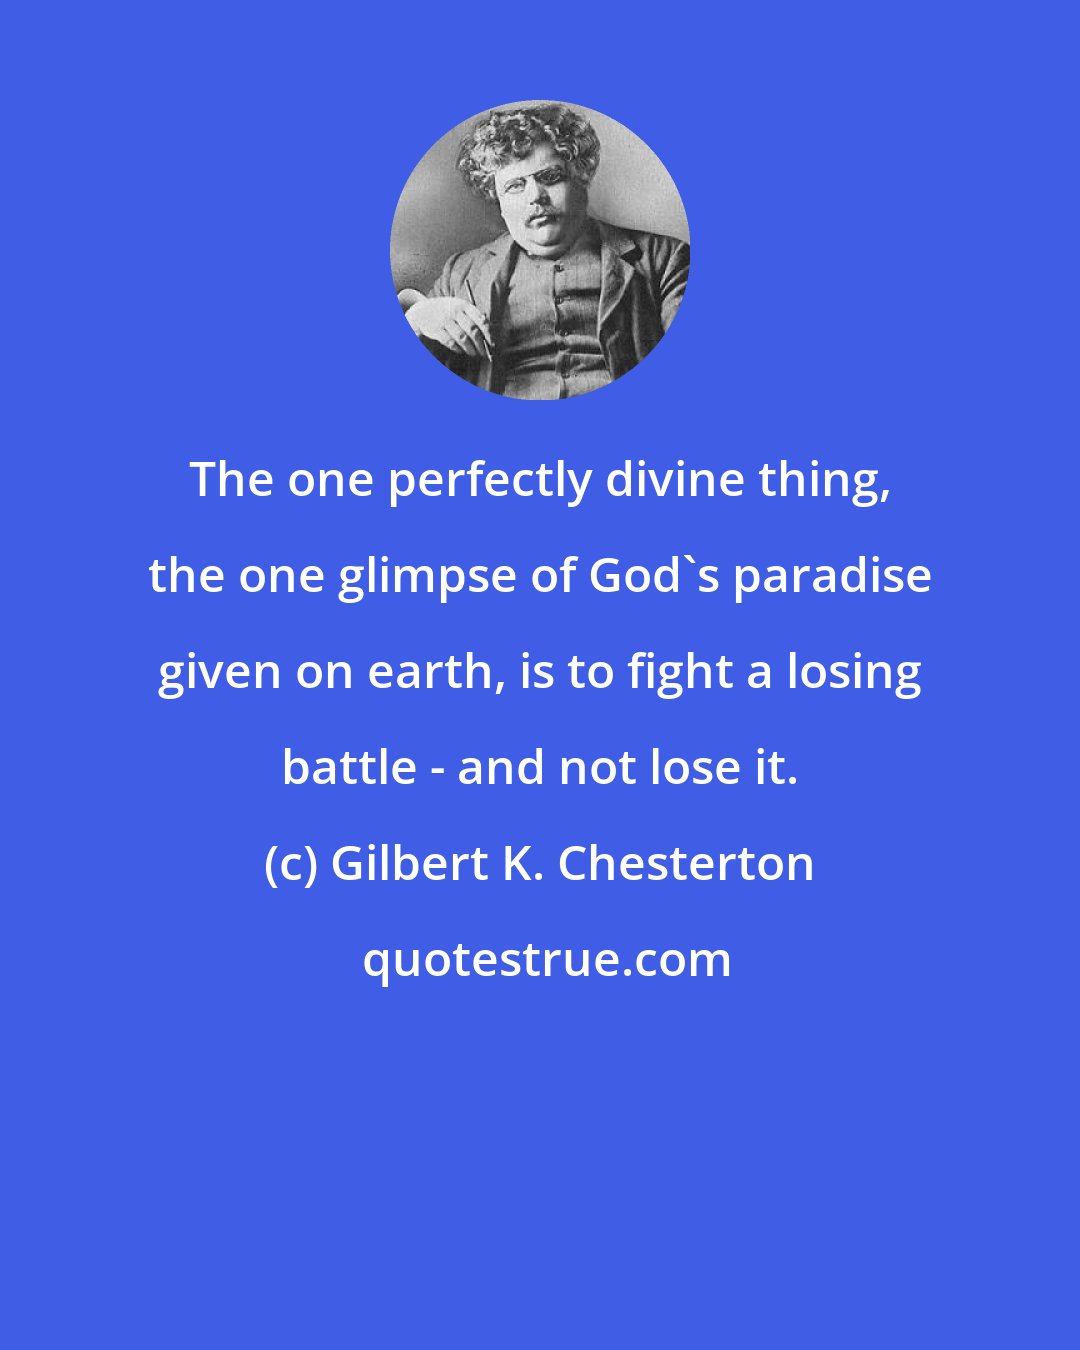 Gilbert K. Chesterton: The one perfectly divine thing, the one glimpse of God's paradise given on earth, is to fight a losing battle - and not lose it.